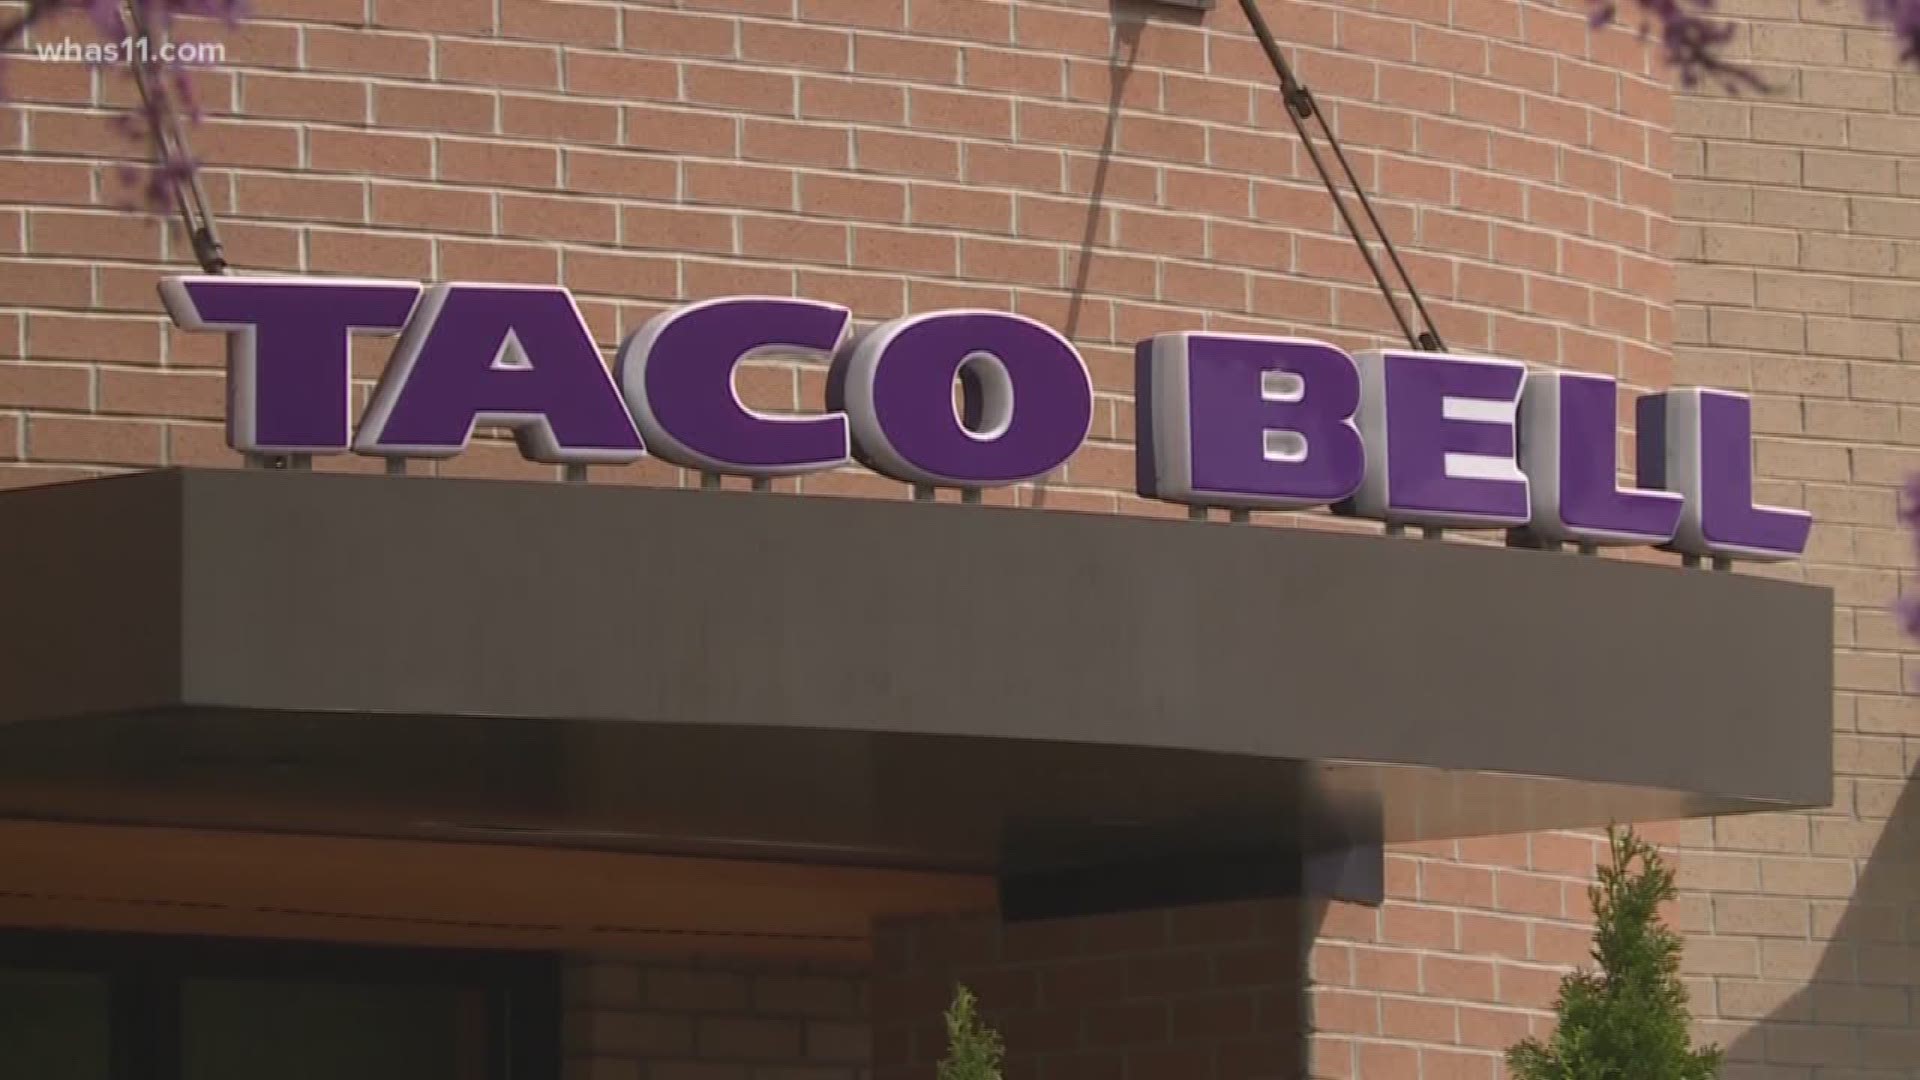 A woman is demanding an apology from a Taco Bell in downtown Louisville after she says the staff discriminated against her and about 20 other people.